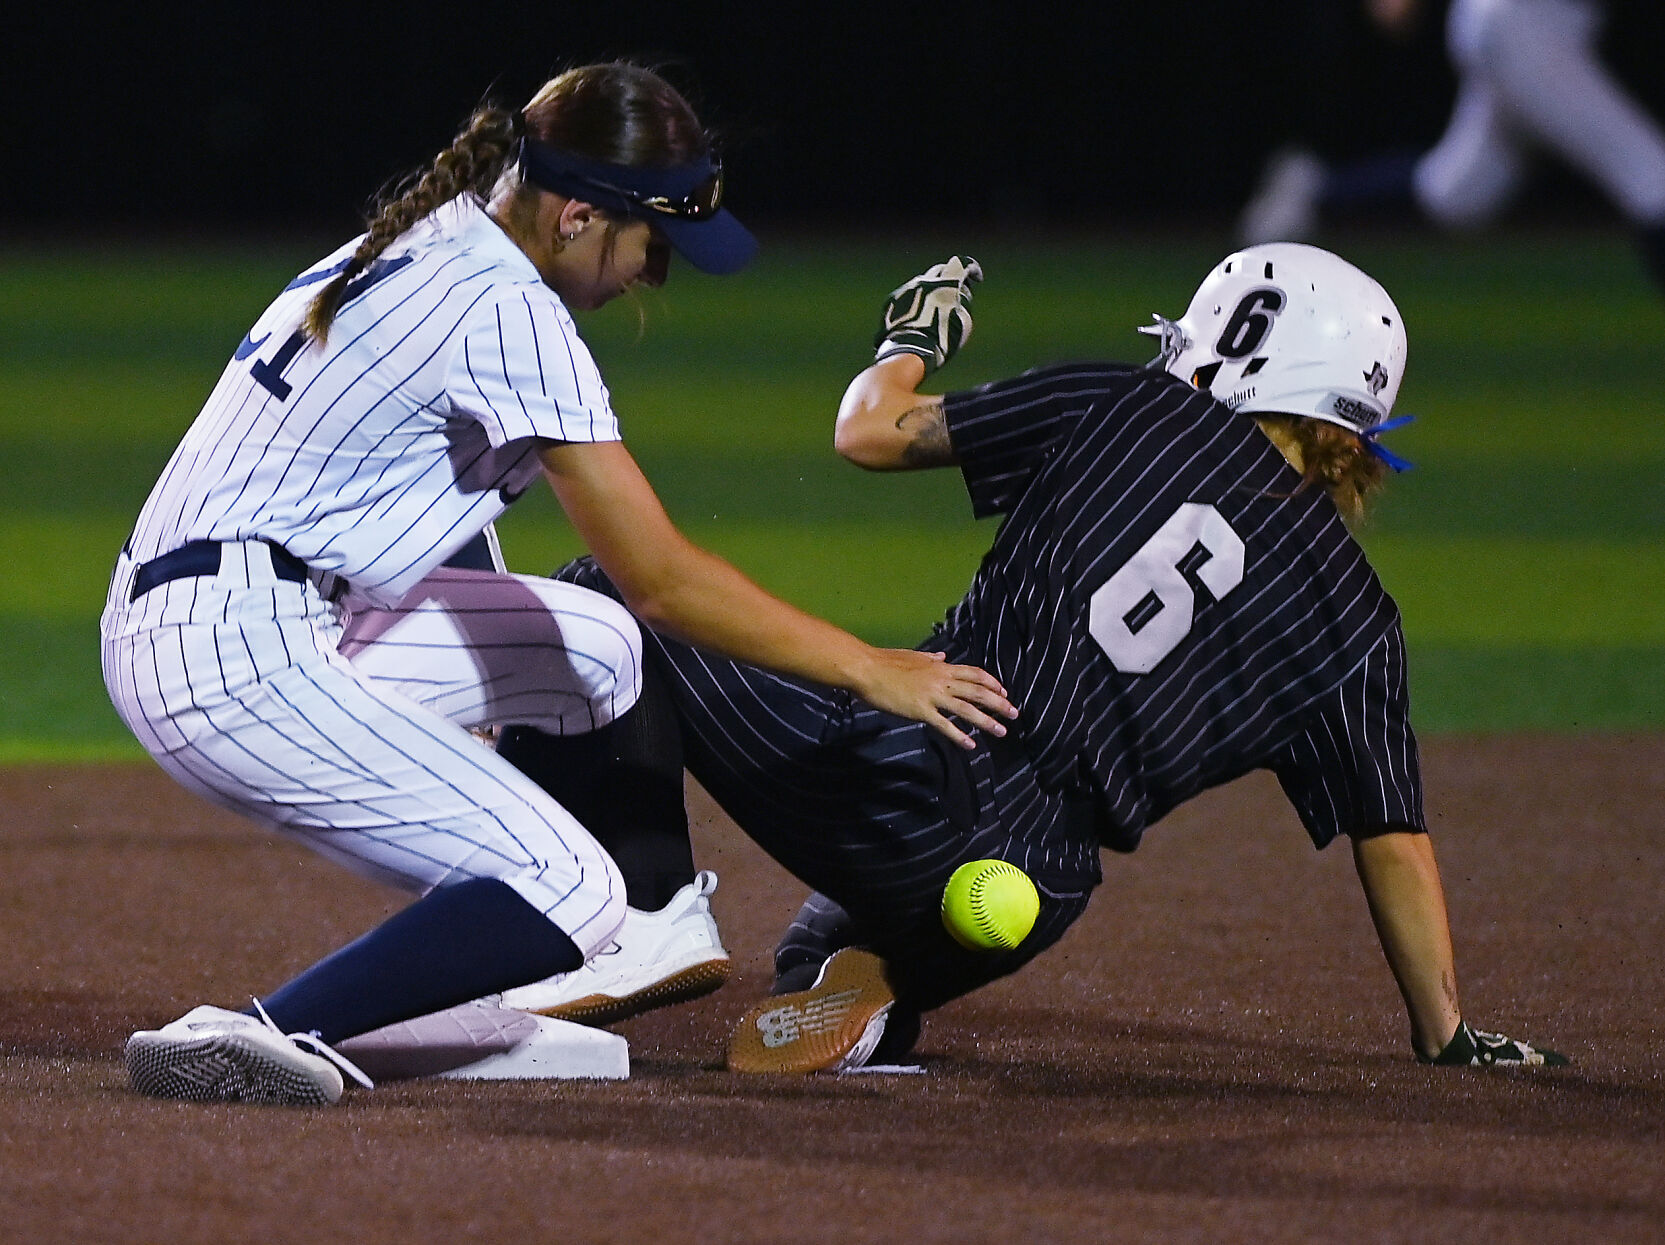 Guyer vs. Keller: Missed Opportunities in Game 2 Set the Stage for Nail-Biting Game 3